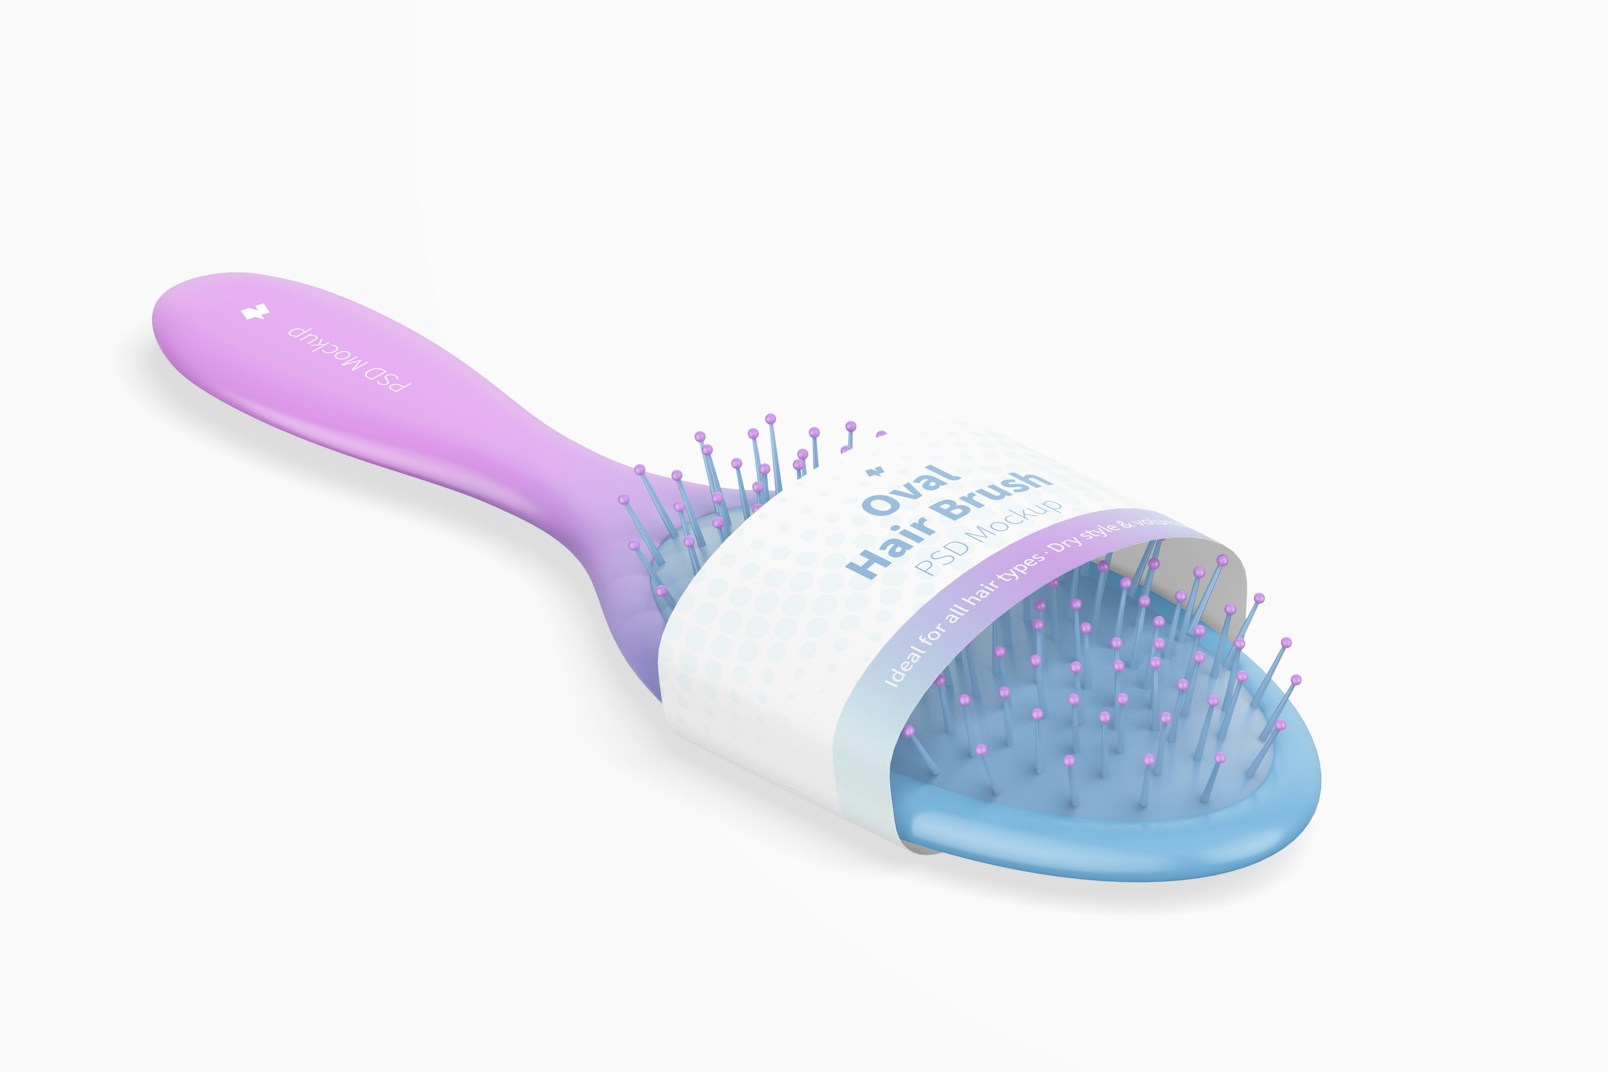 Oval Hair Brush with Label Mockup, Isometric Right View